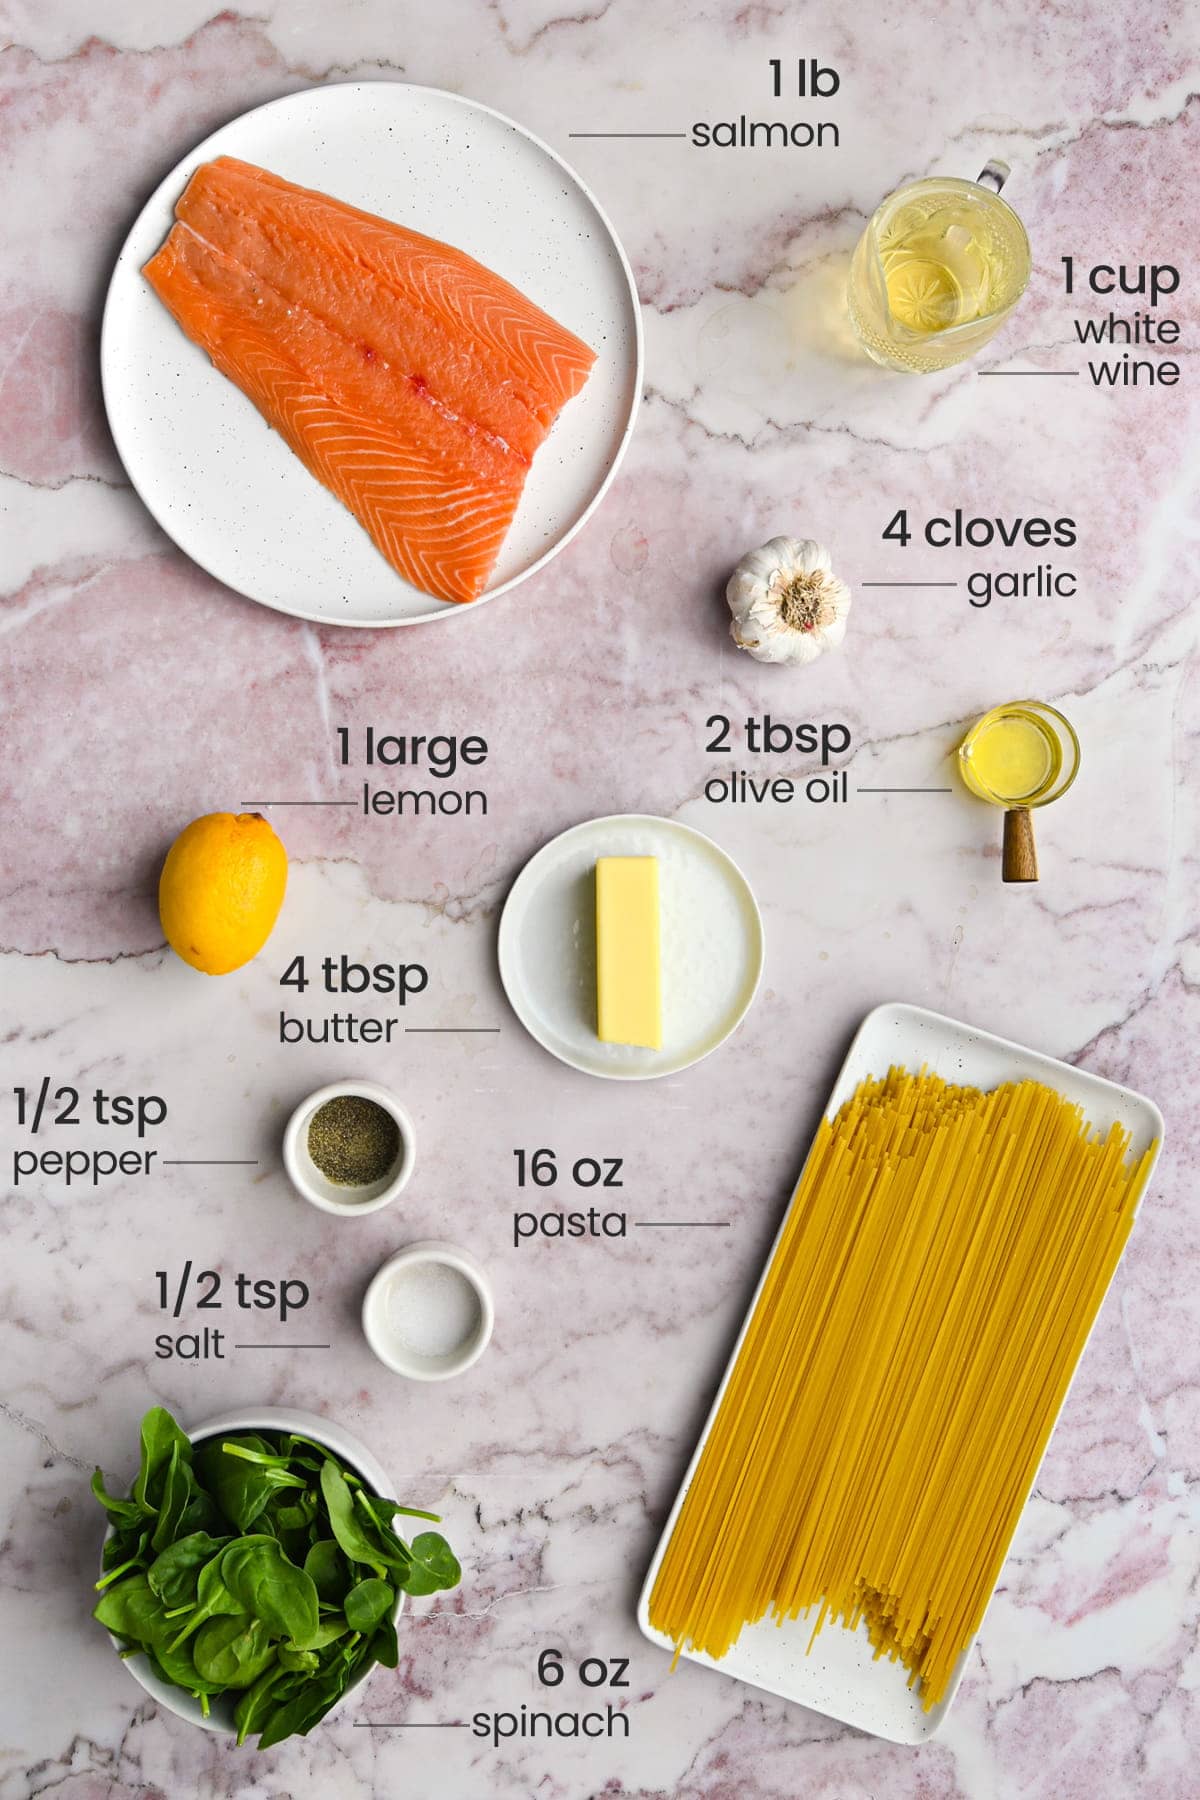 ingredients for salmon spinach pasta - salmon, white wine, garlic, olive oil, lemon, unsalted butter, pepper, salt, linguine, spinach